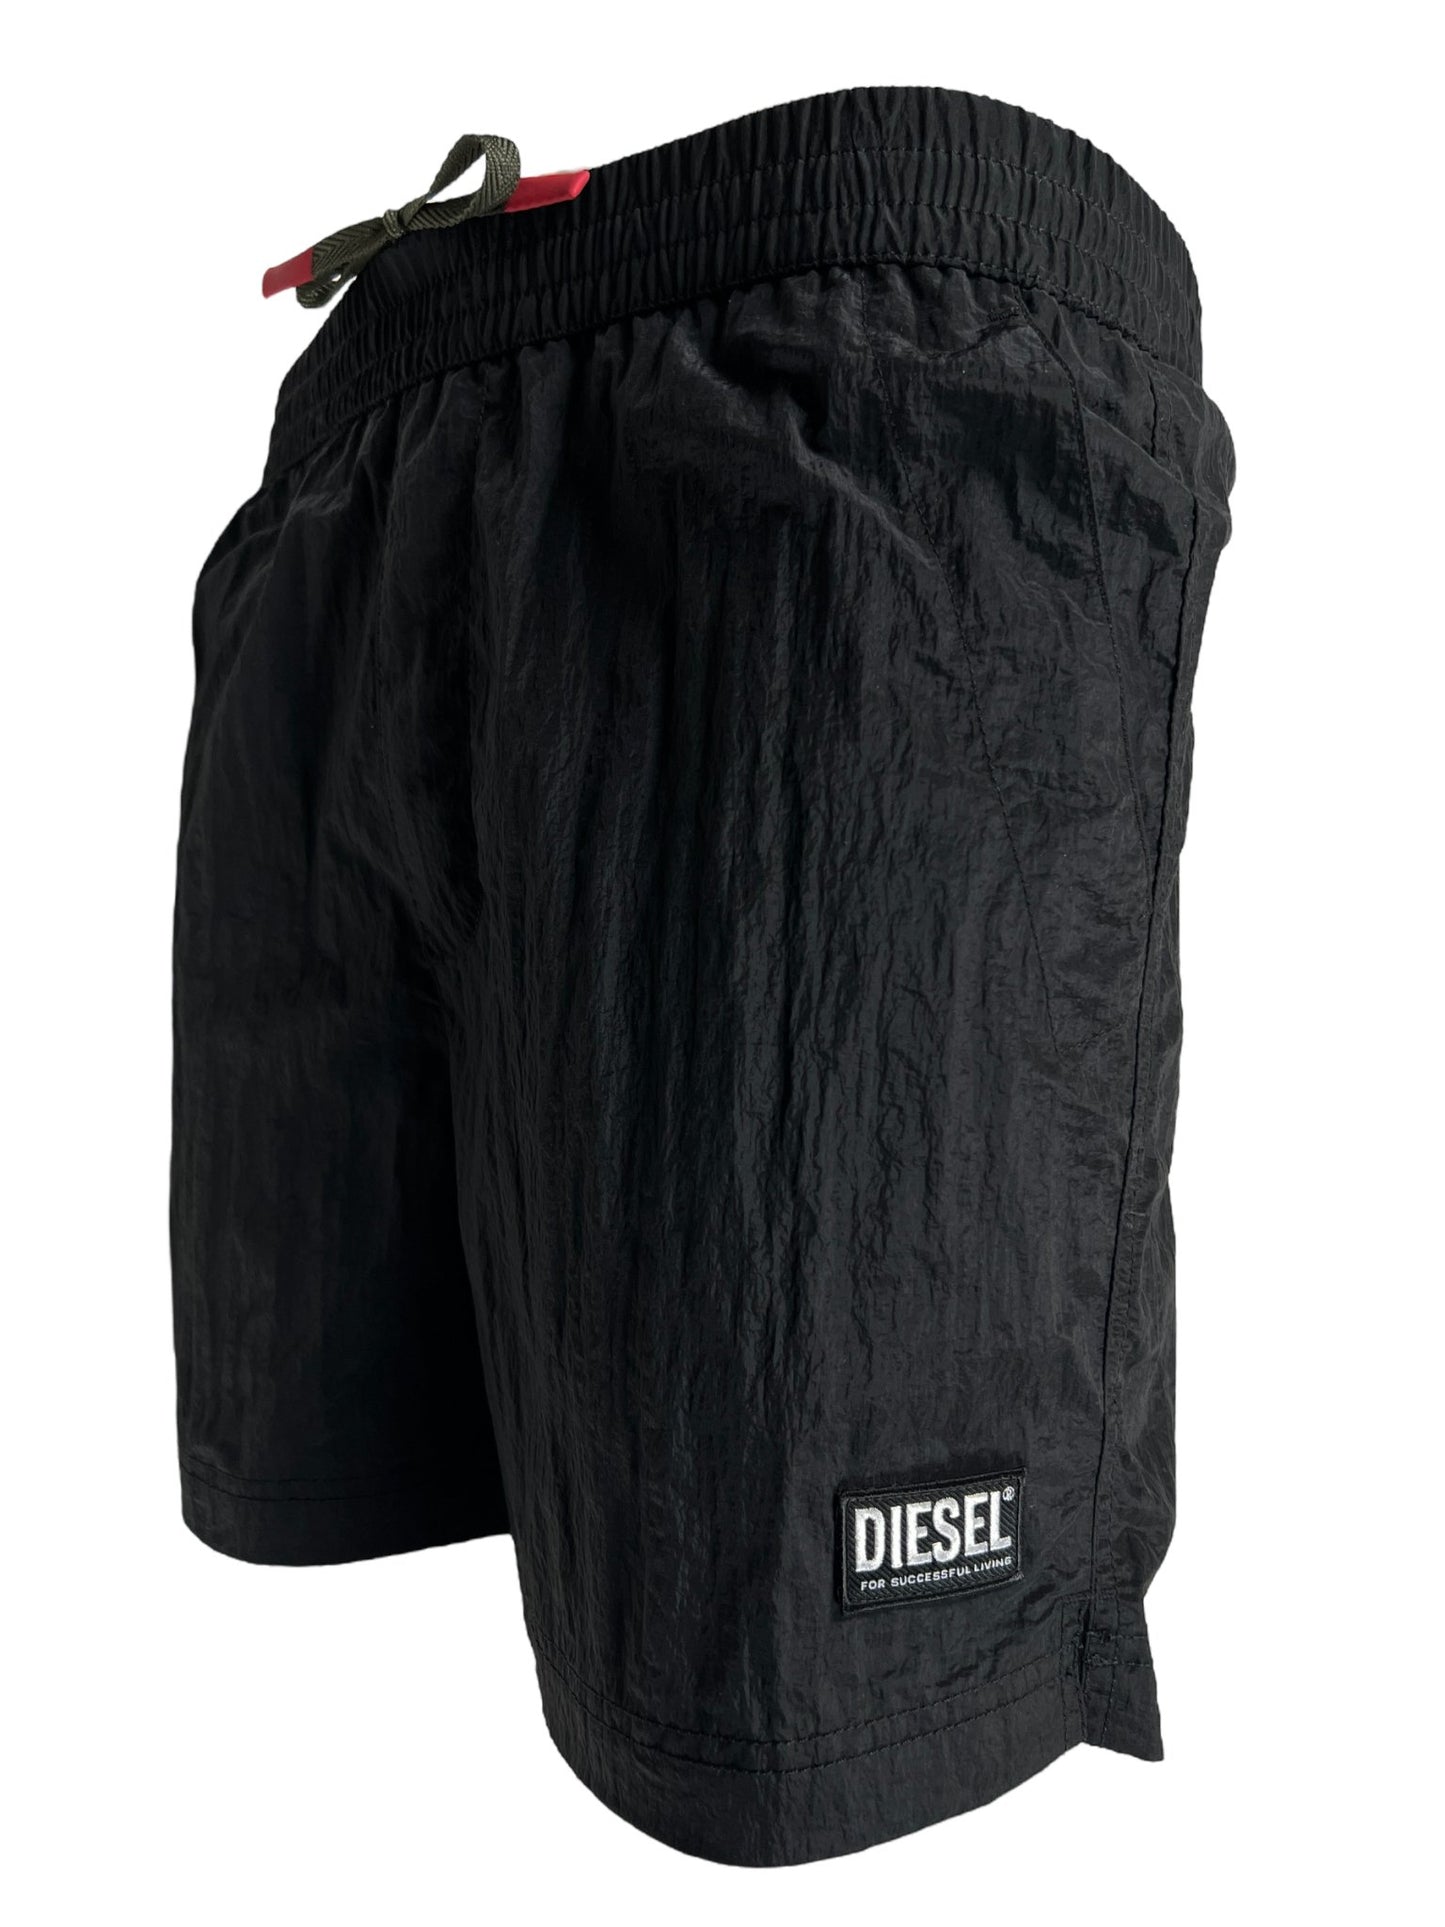 Black DIESEL men's board shorts made from recycled fabric, with elasticated waist and logo patch on the right side, isolated on white background.